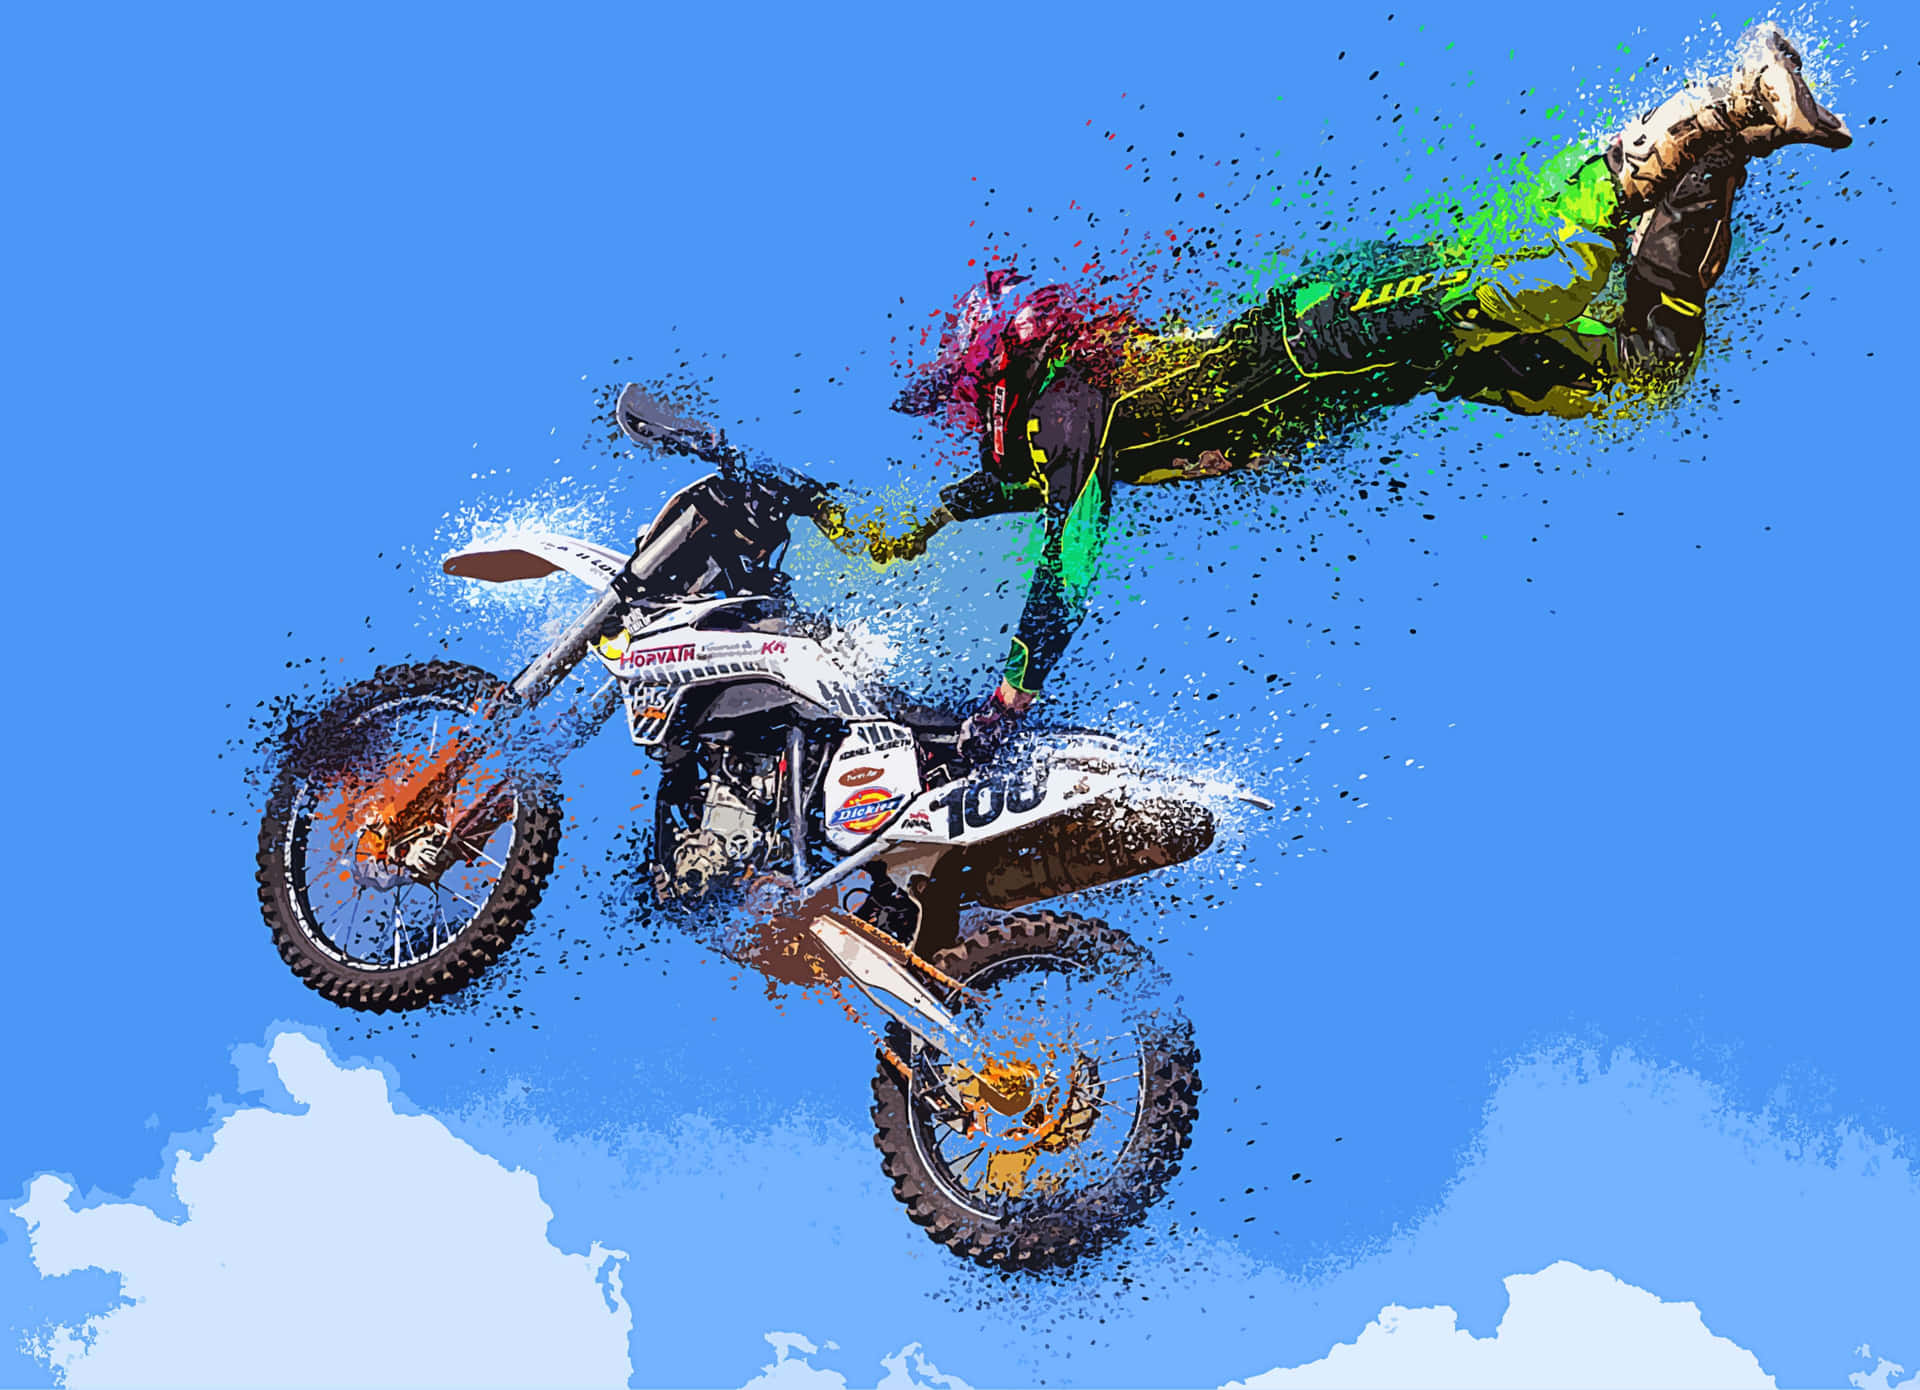 Motocross Racer Catching Air on Dirt Track